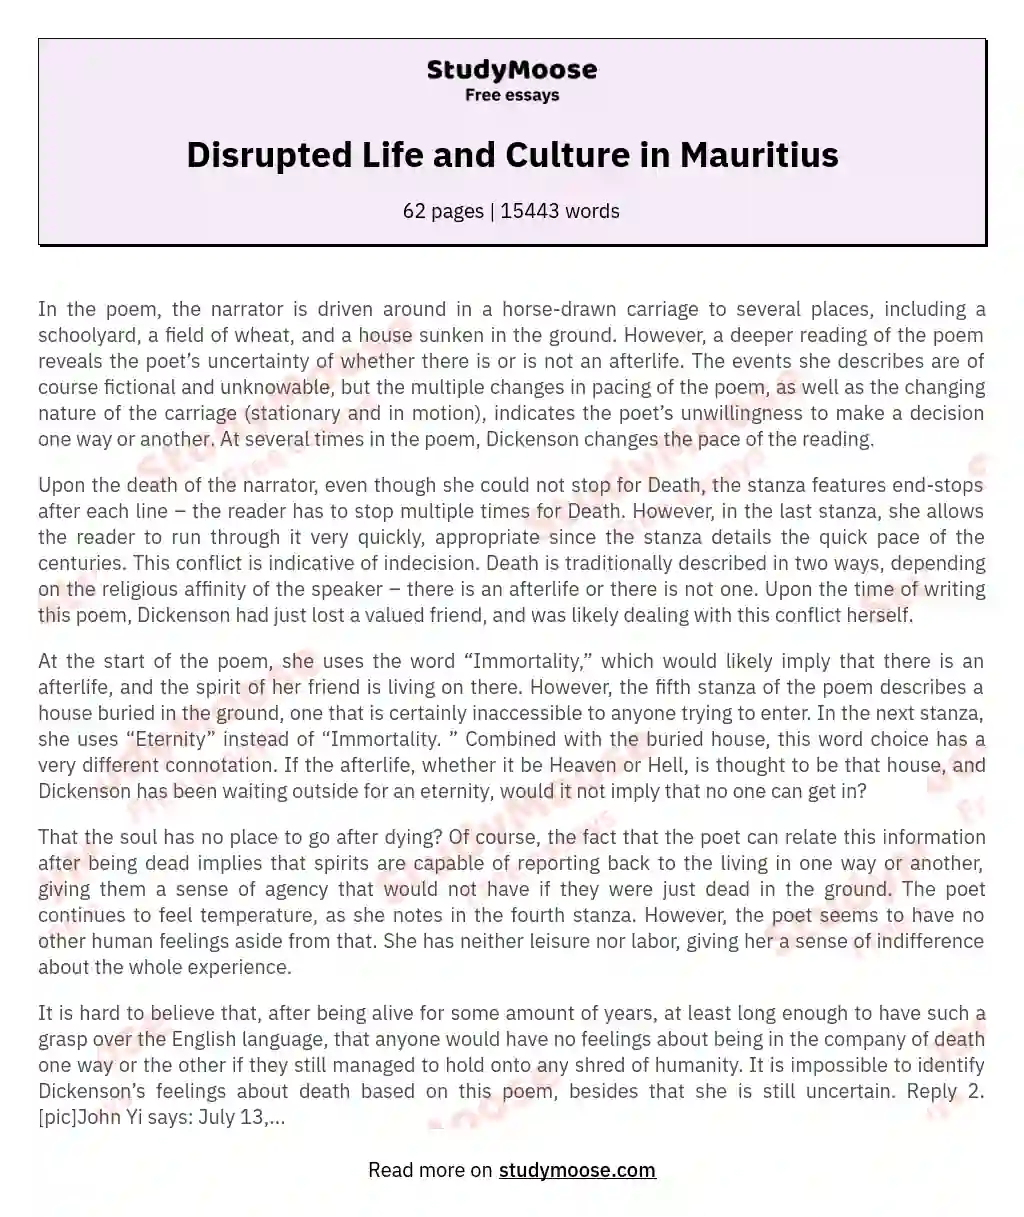 Disrupted Life and Culture in Mauritius